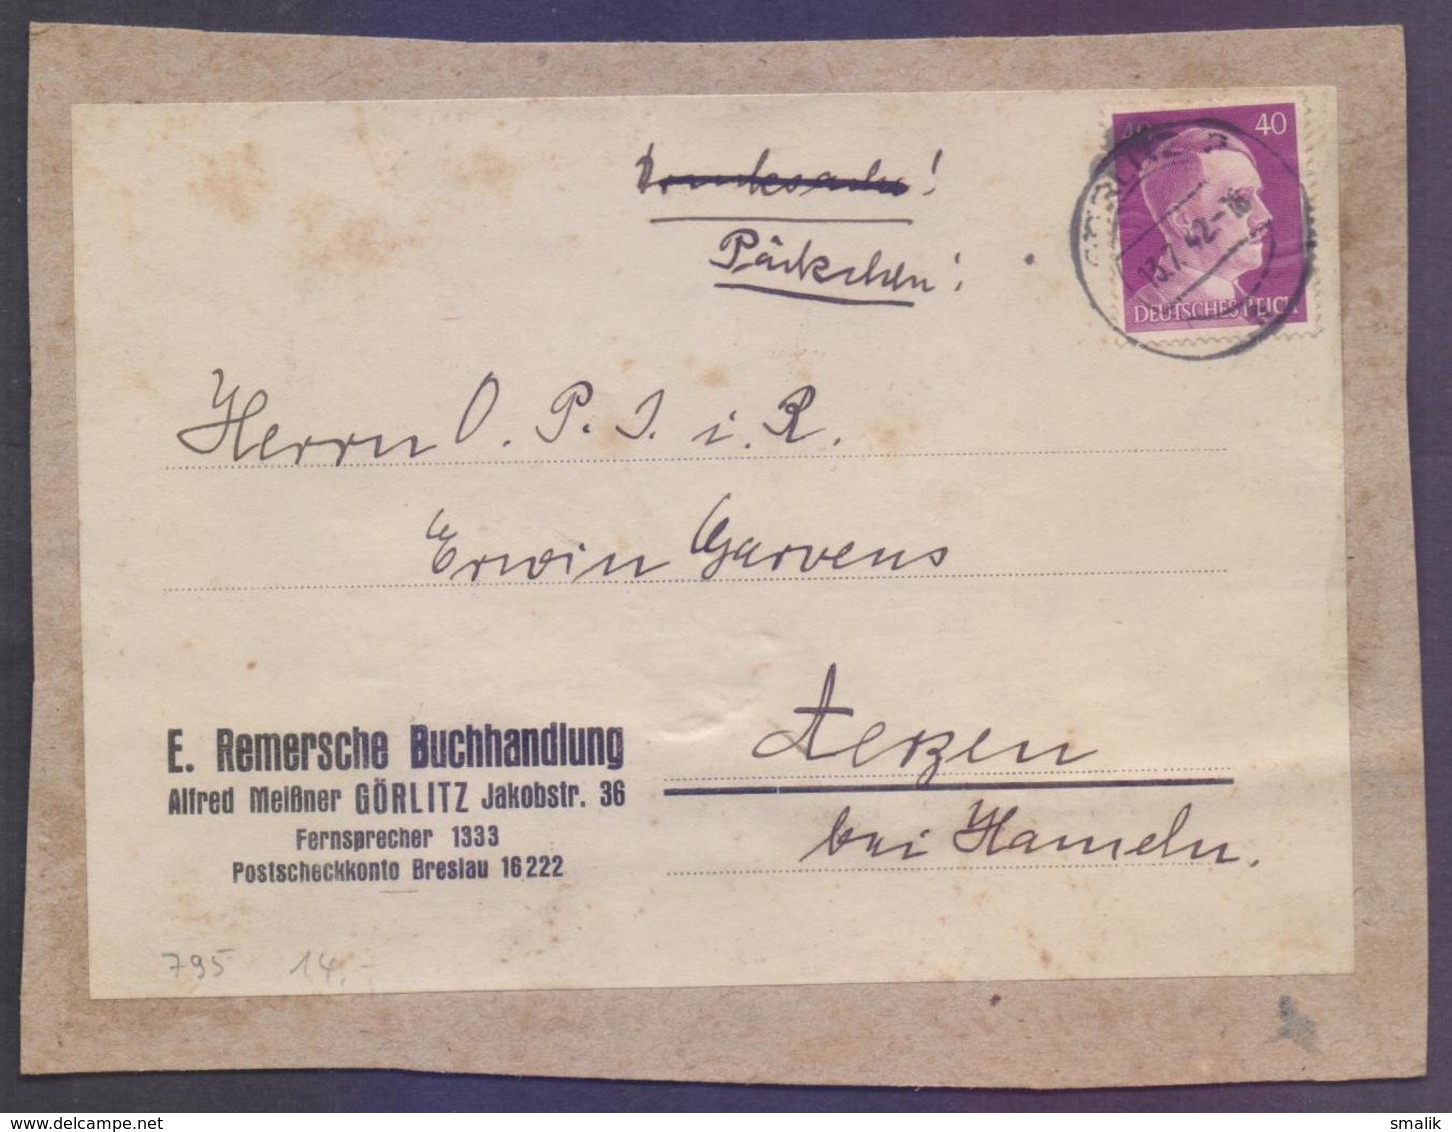 DEUTSCHES REICH GERMANY - 1 Stamp On Parcel Tag Card, Postal Used 13.7.1942 - Covers & Documents